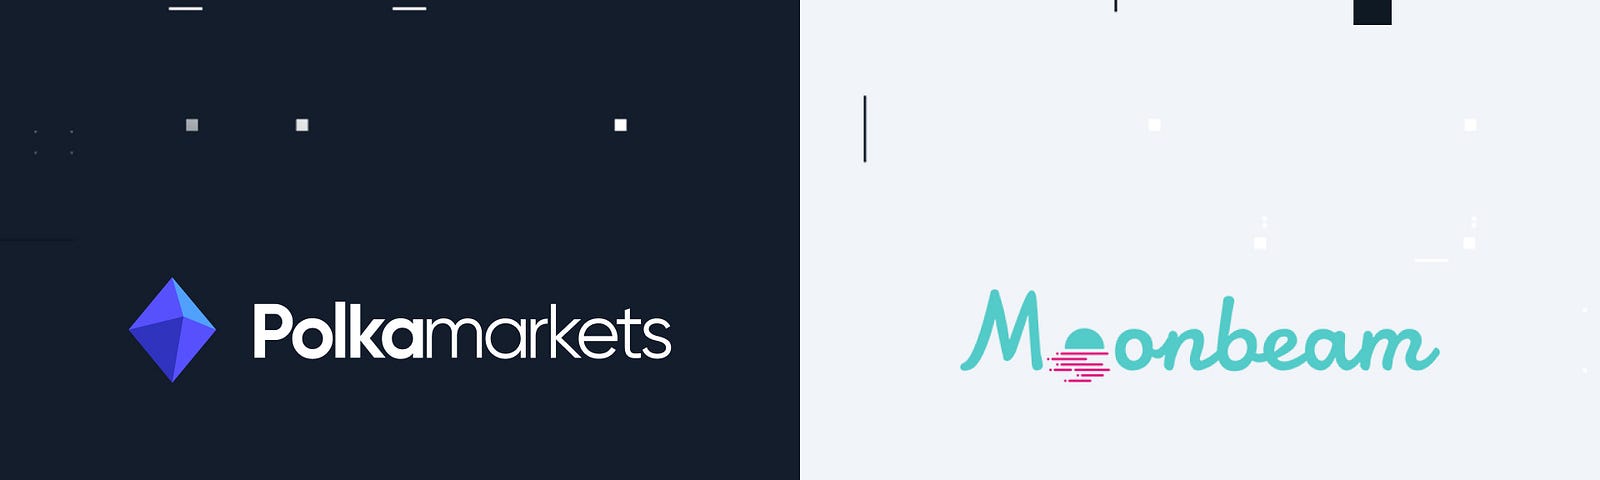 Polkamarkets Partners with Moonbeam Network to Accelerate Migration To Polkadot